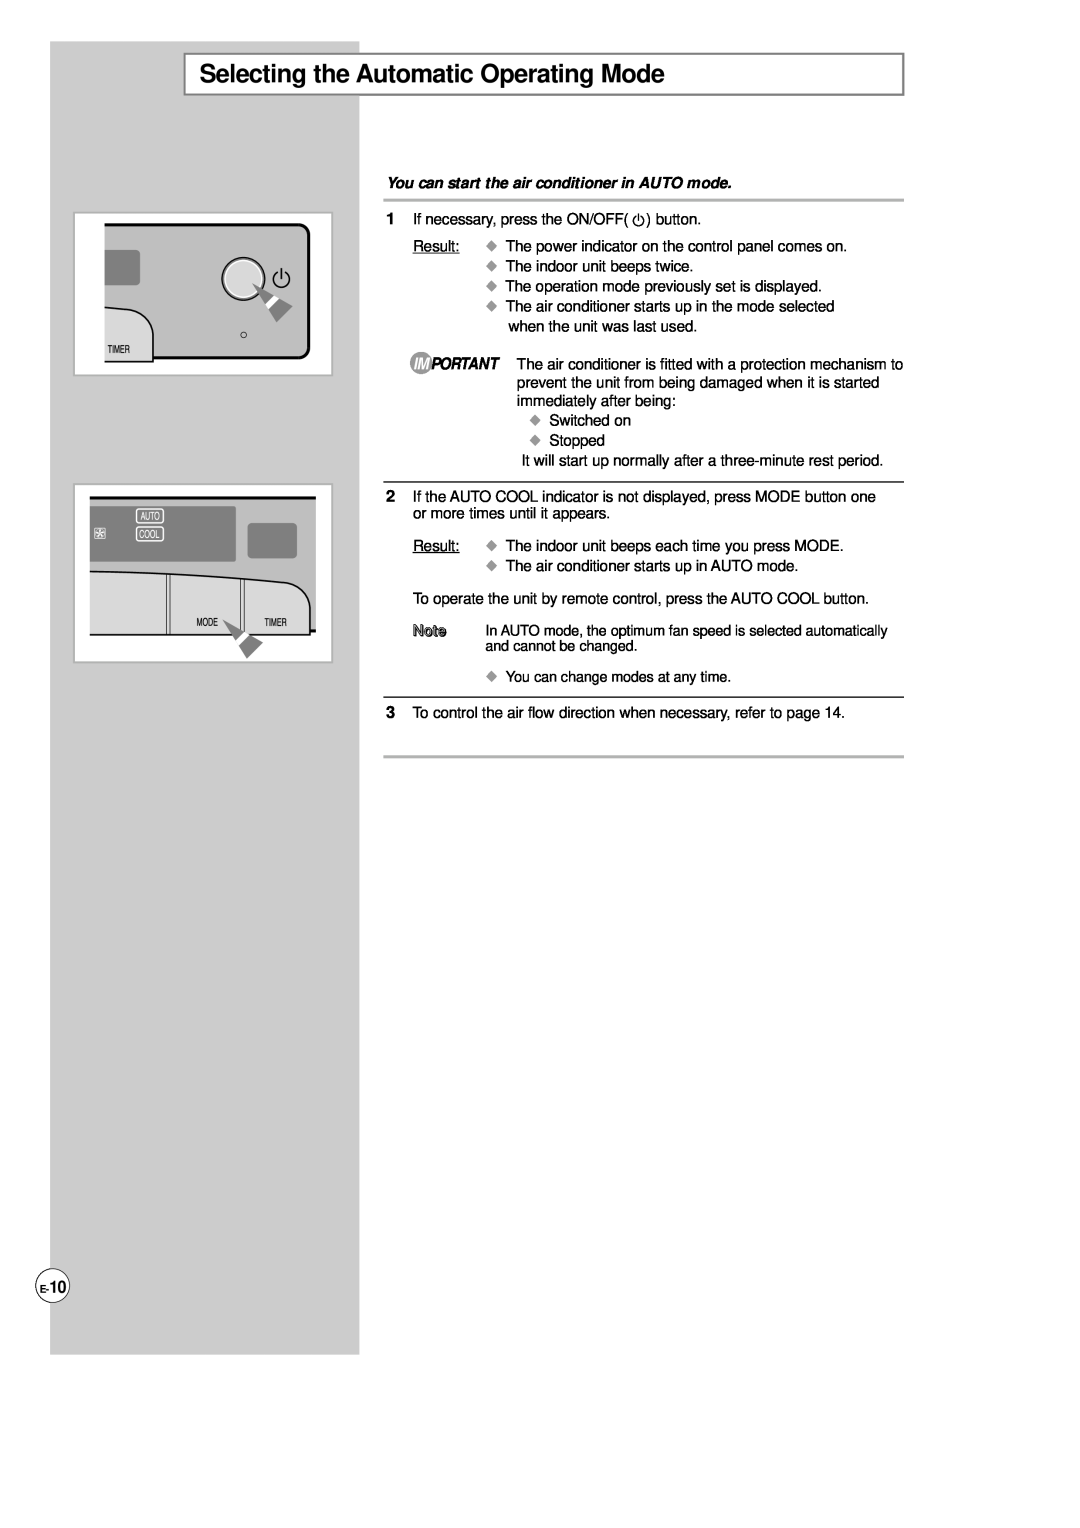 Samsung AP500F installation manual Selecting the Automatic Operating Mode, You can start the air conditioner in AUTO mode 